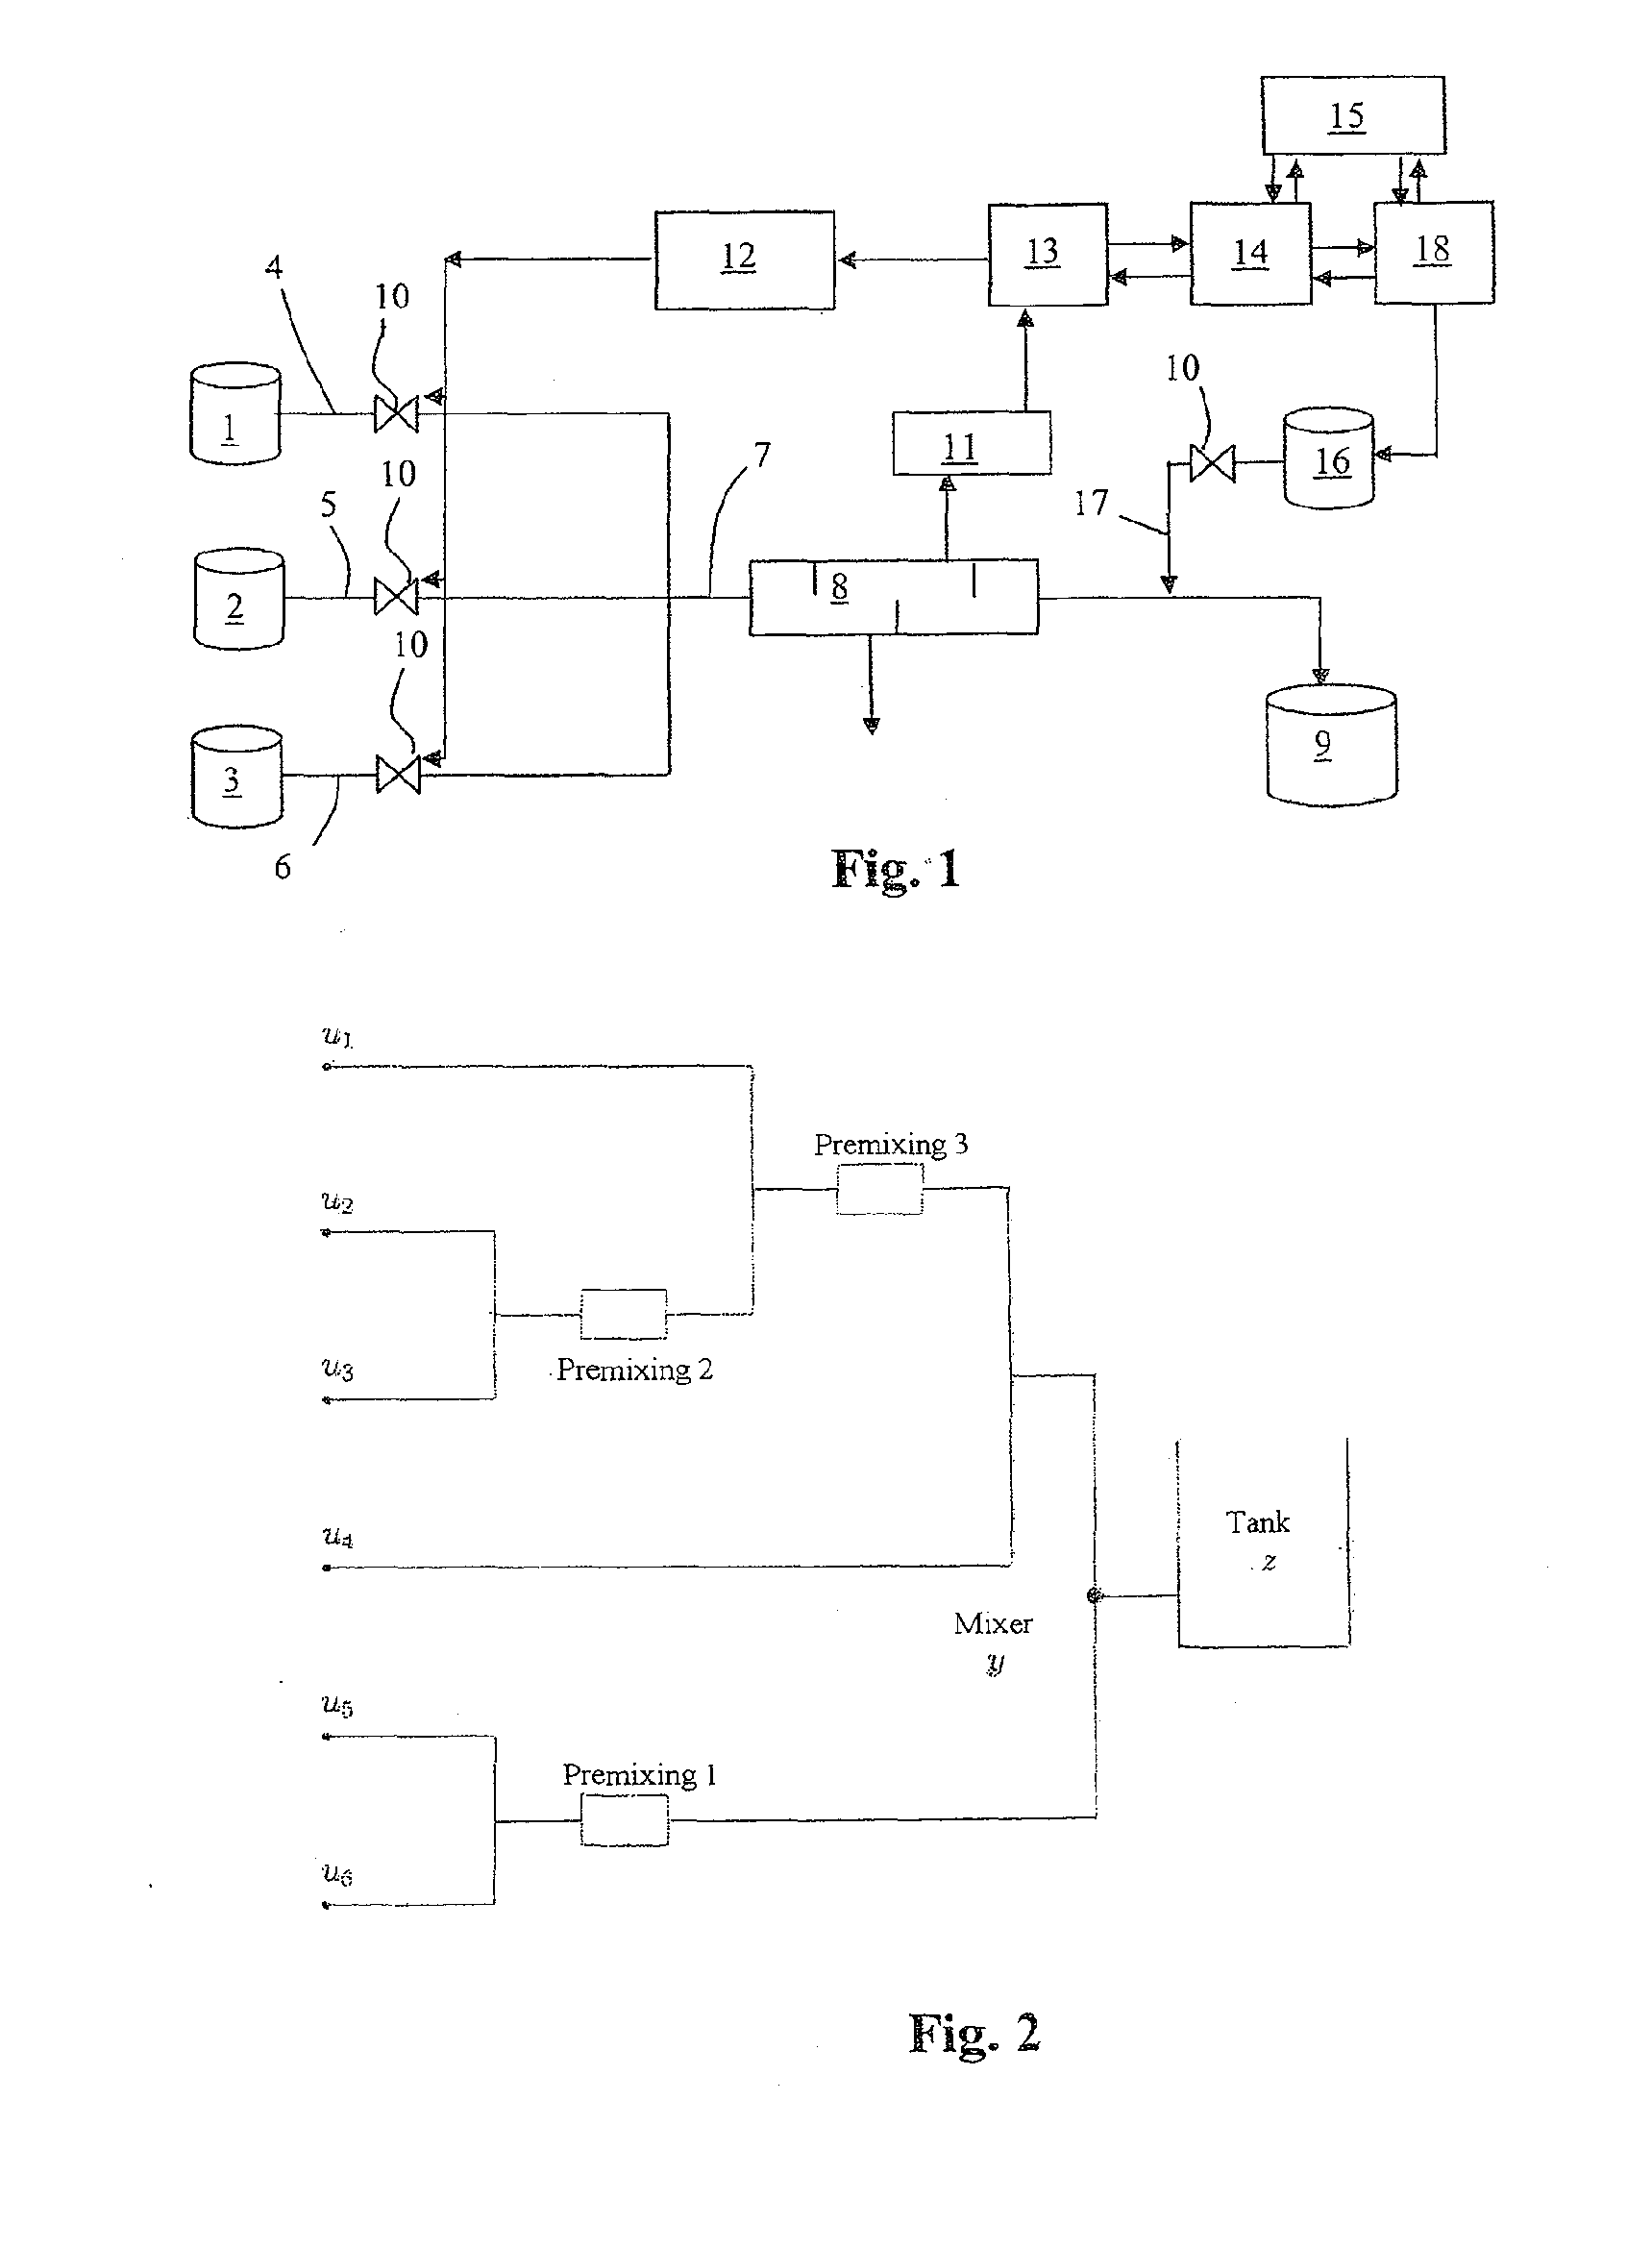 Method and device for producing a mixture of constituents with constraints, especially with premixing